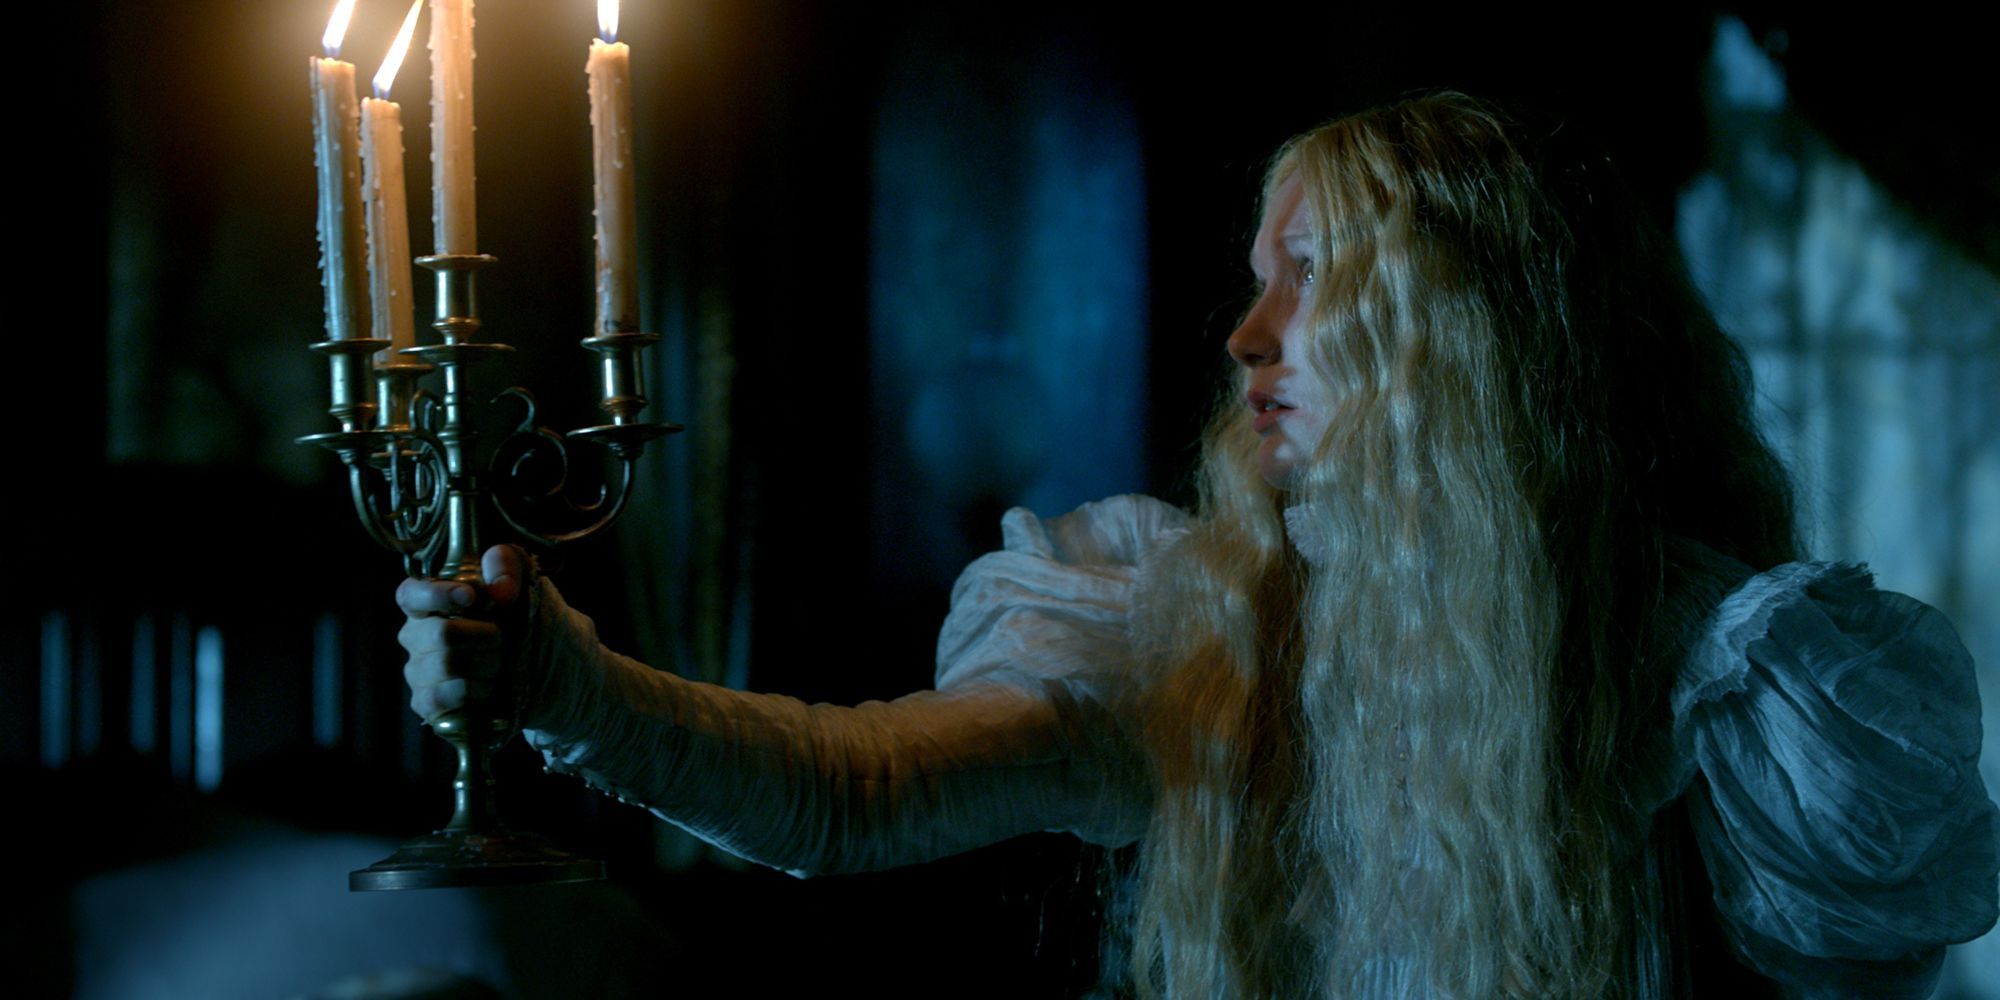 Edith searches the gloom of Crimson Peak with a candelabra